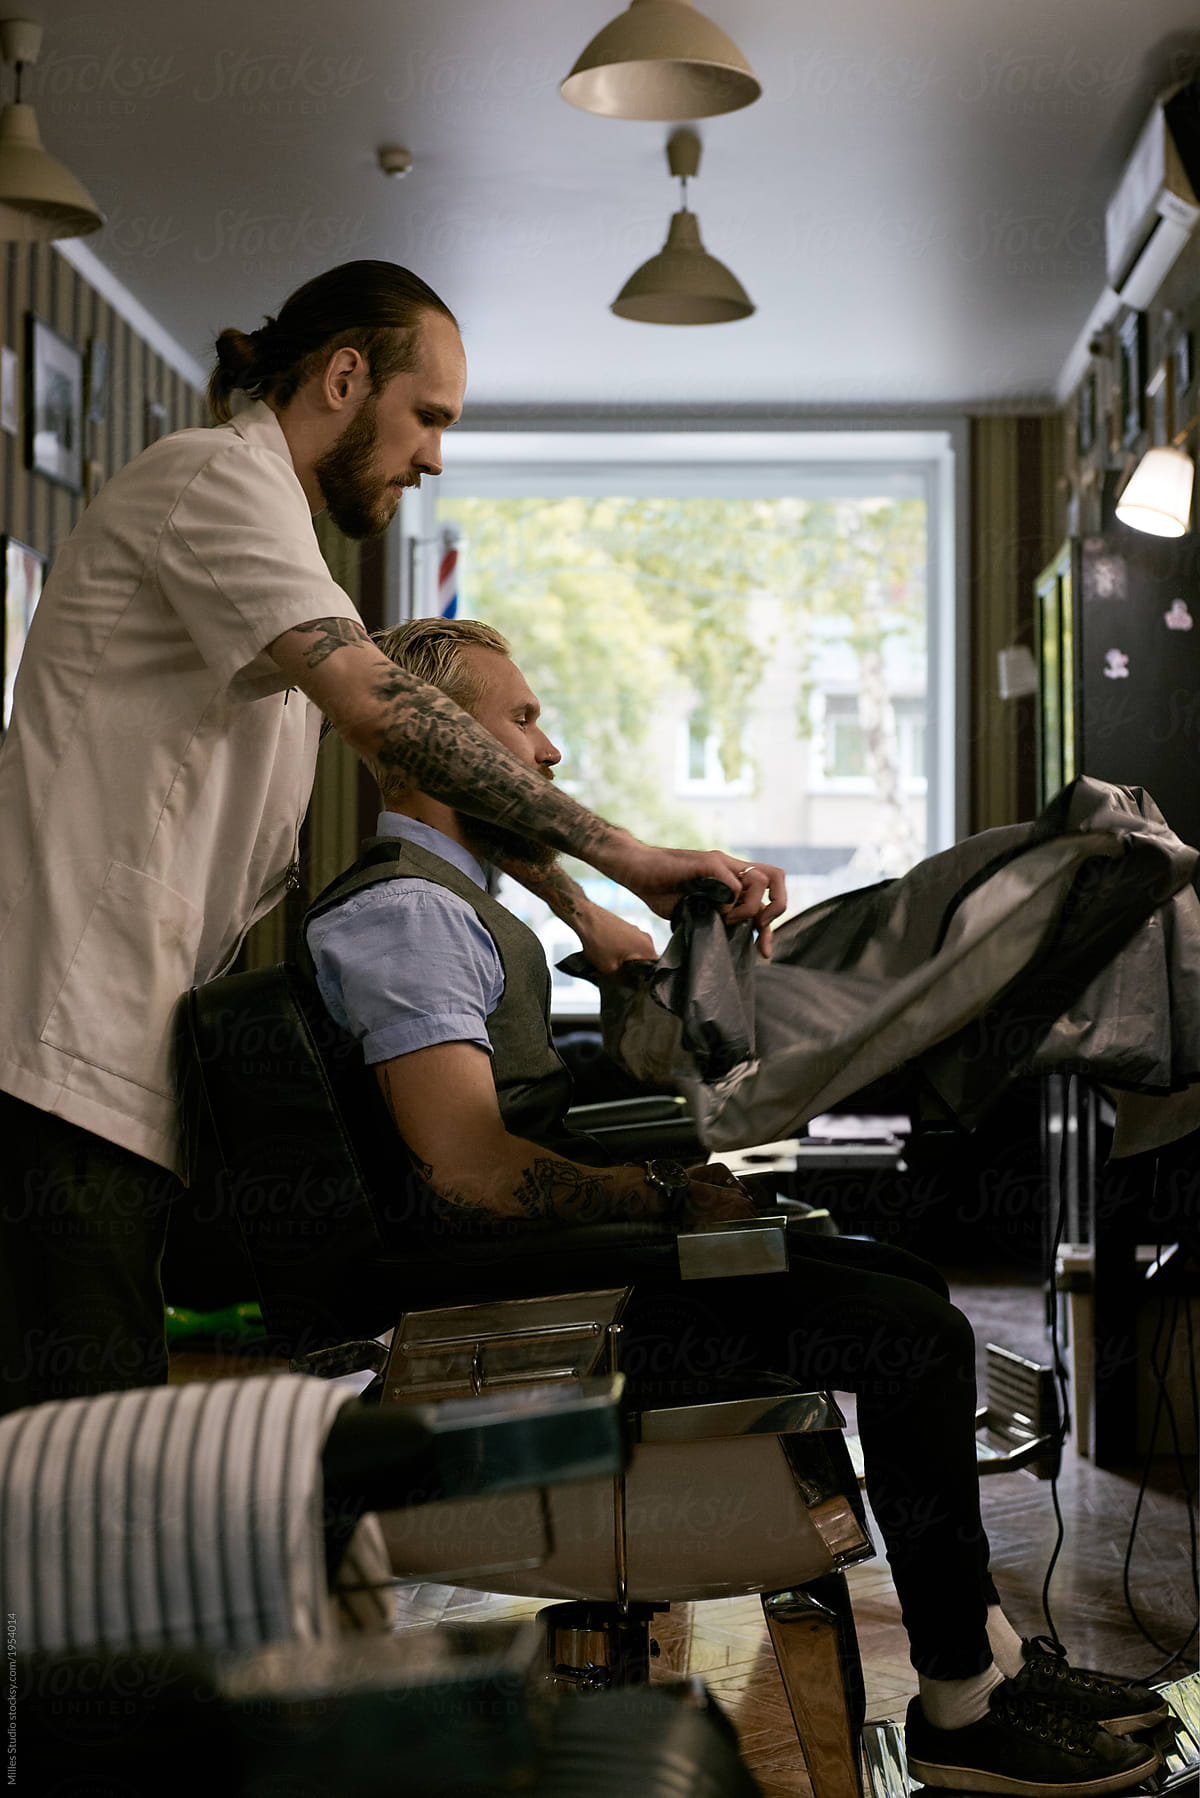 Barber putting protective cape on client